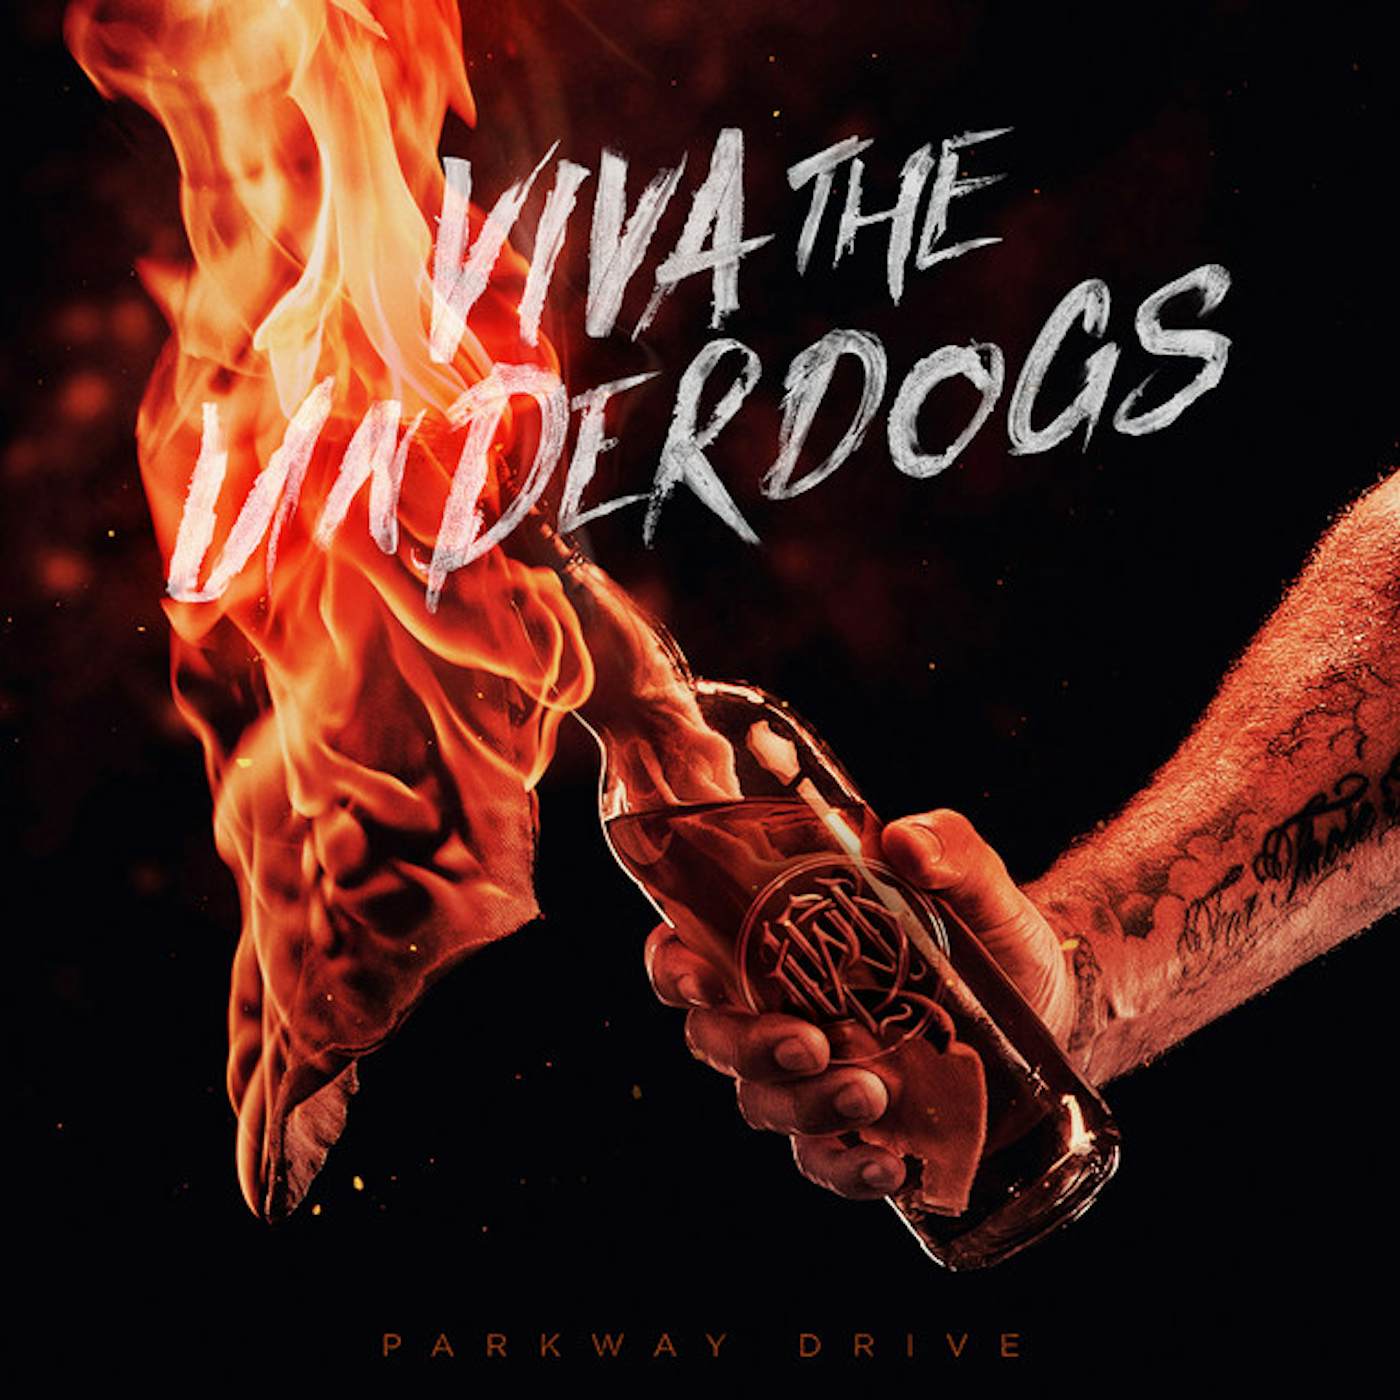 Parkway Drive VIVA THE UNDERDOGS CD